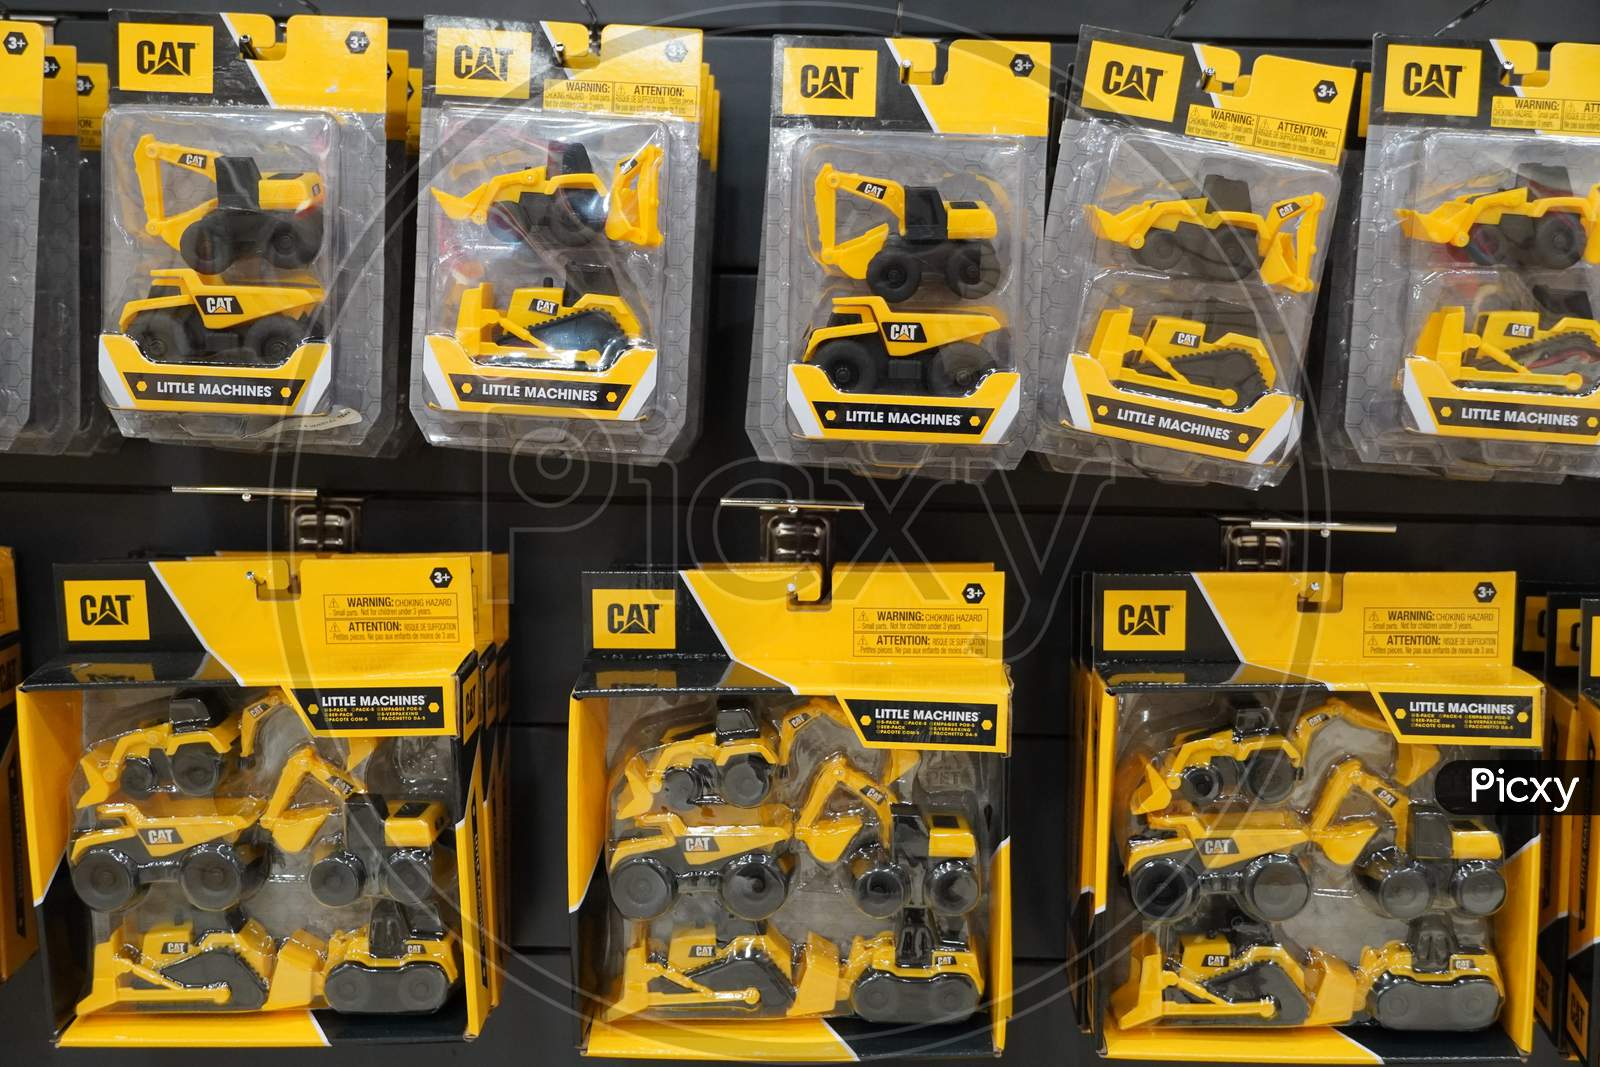 Dubai Uae December 2019 - A Collection Of Cat Excavator And Truck Toys At Toys Store. Toys Hanging In Store For Sale. Cat Brand Toys In A Toy Store.